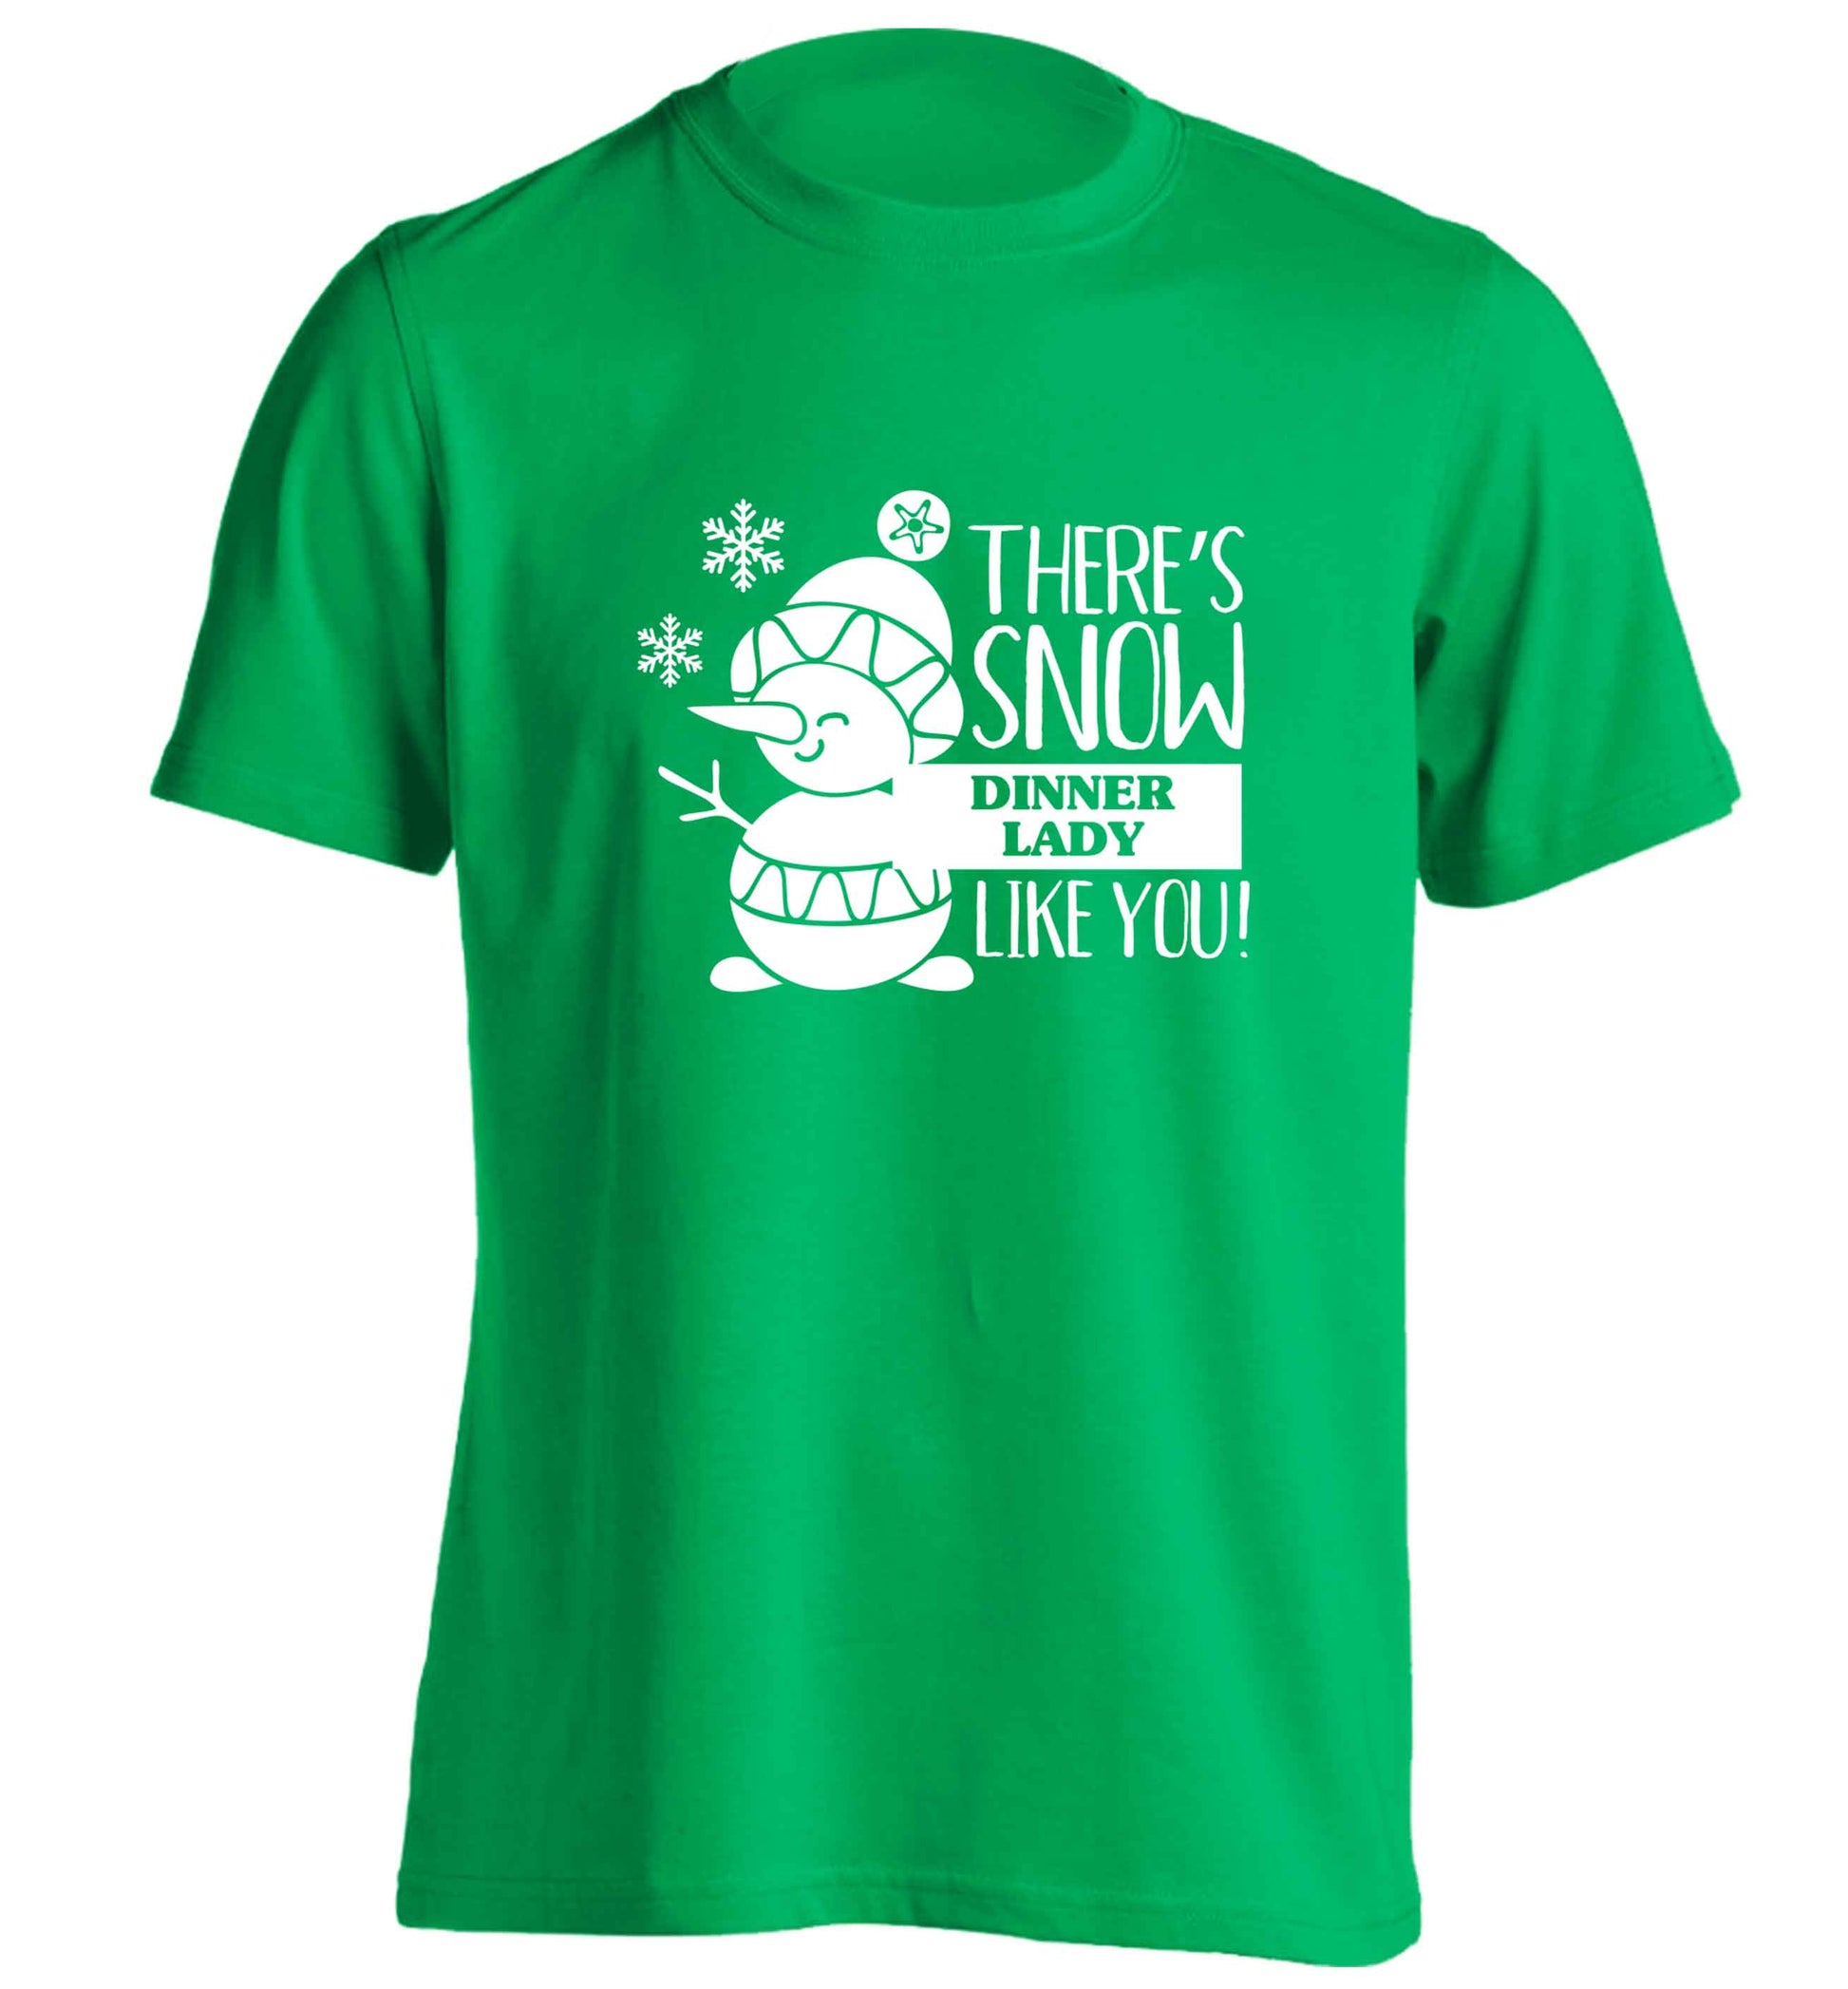 There's snow dinner lady like you adults unisex green Tshirt 2XL